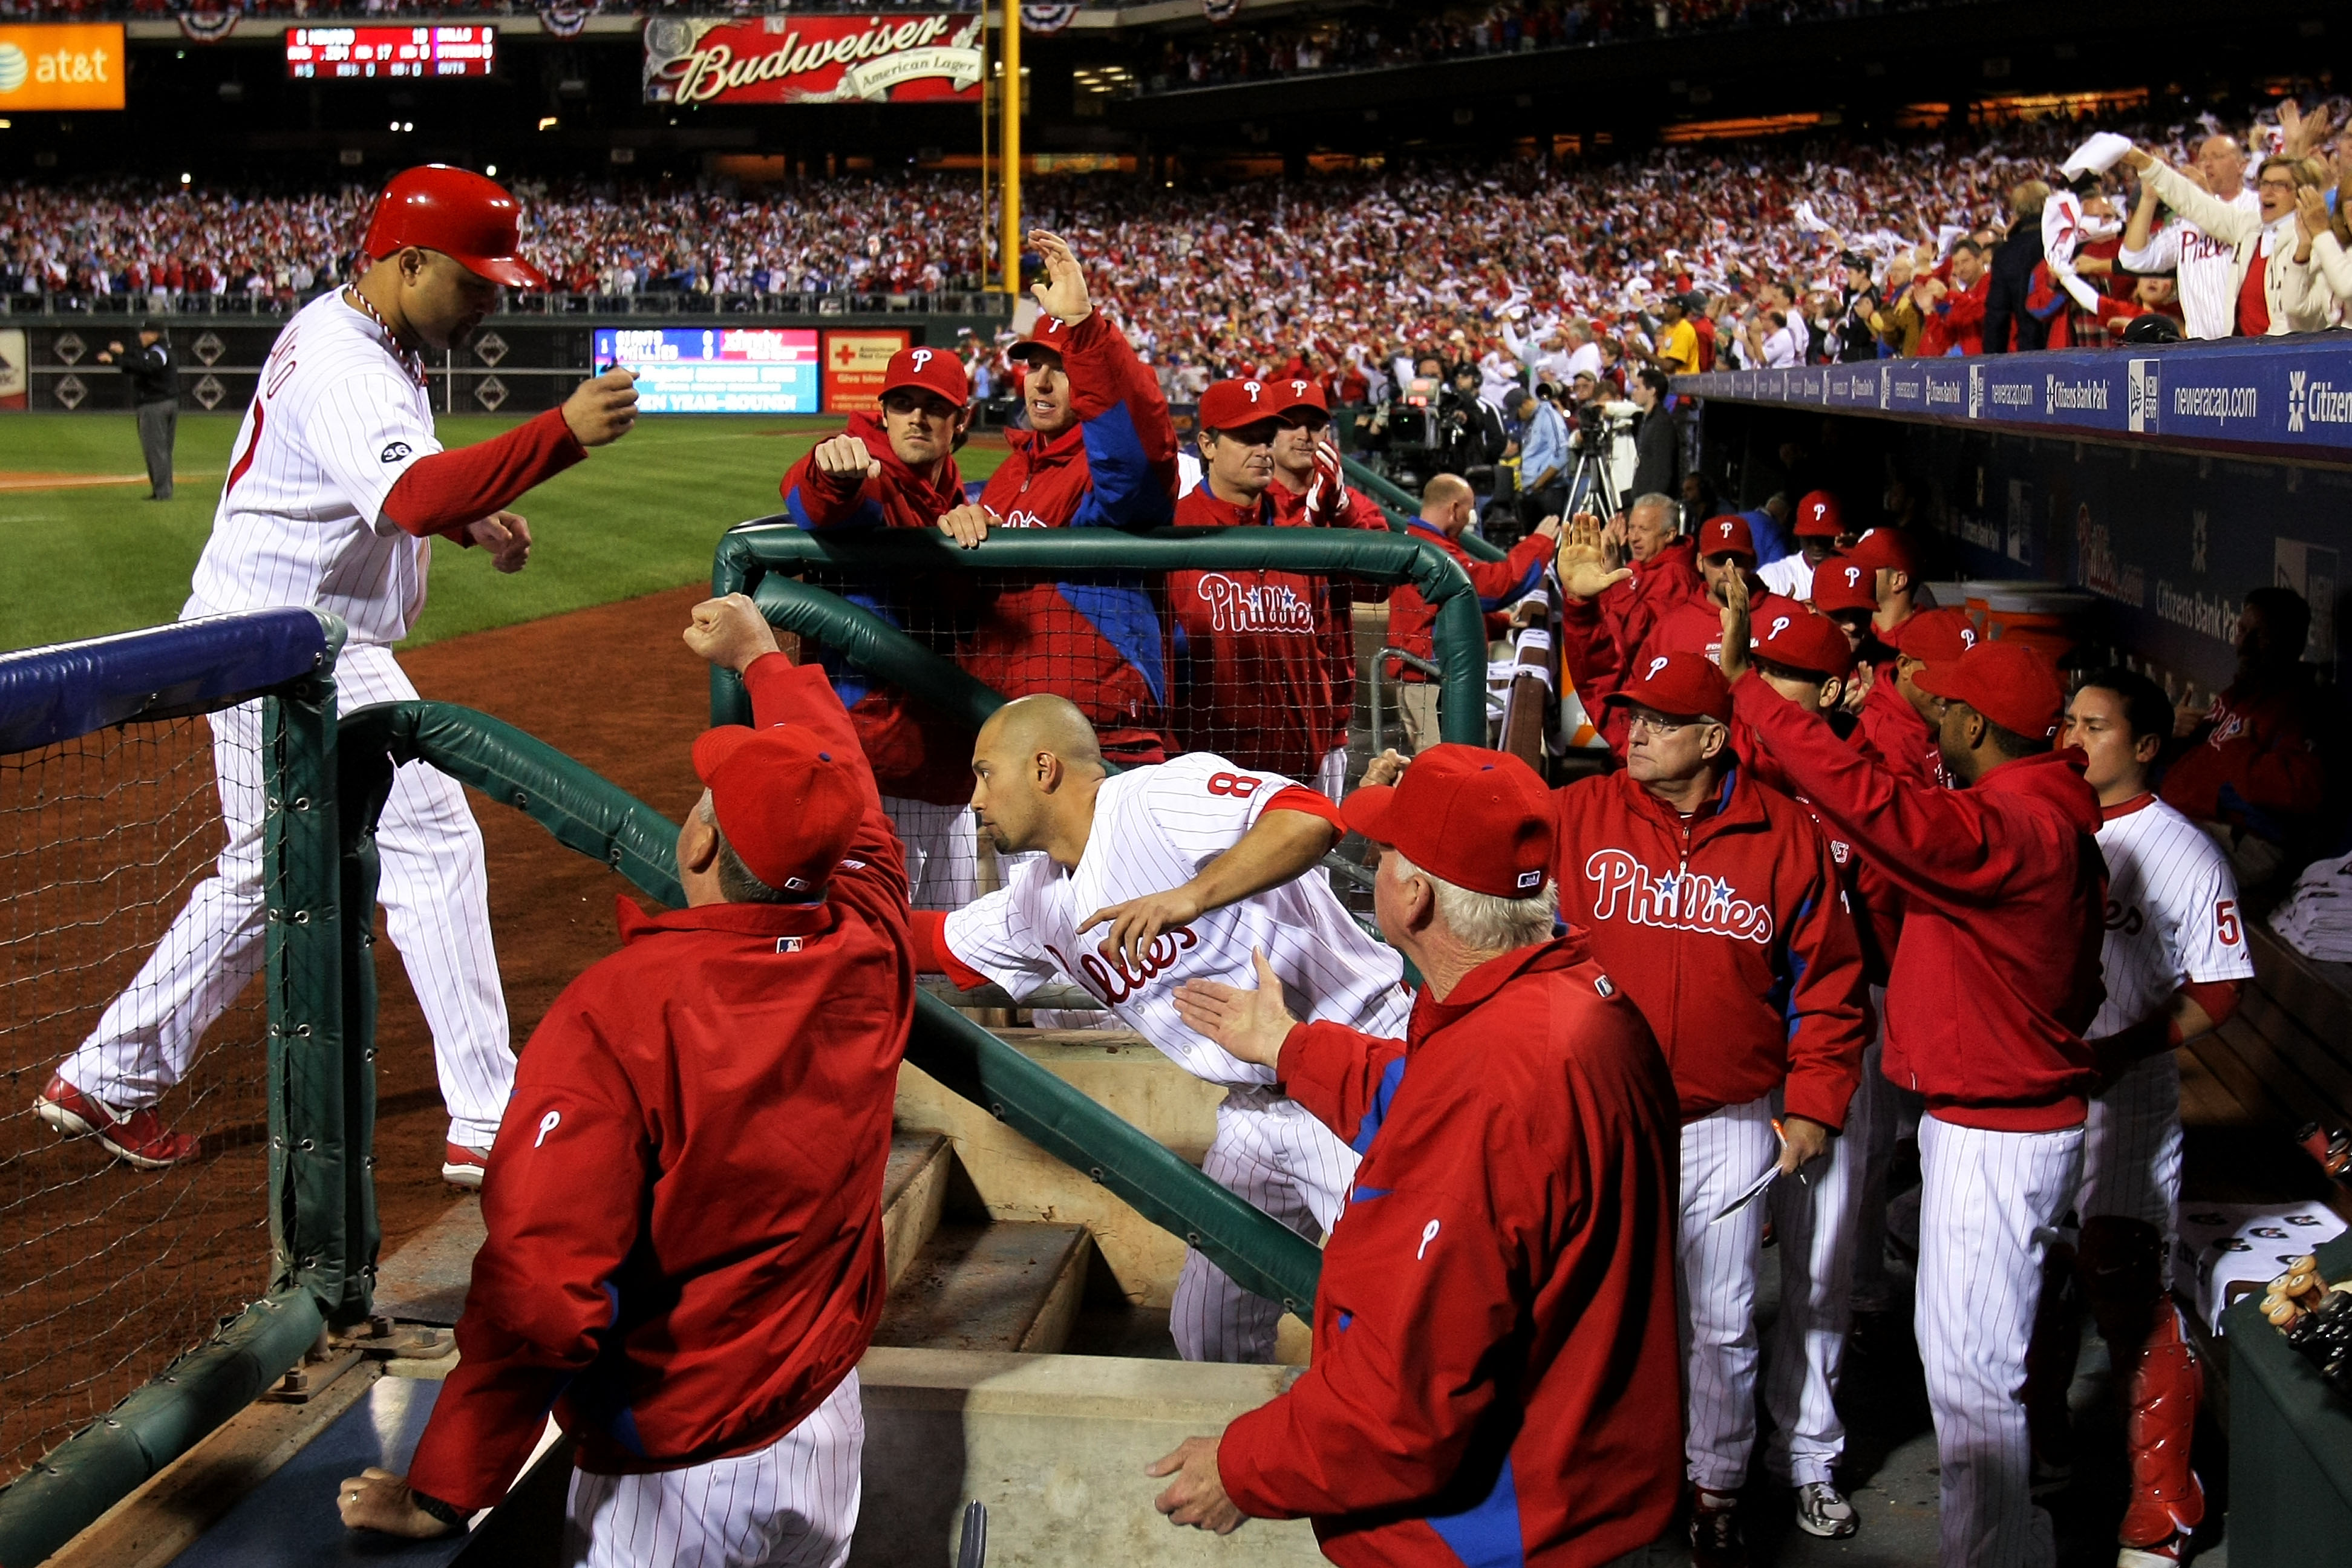 PHILADELPHIA - OCTOBER 23:  Placido Polanco #27 of the Philadelphia Phillies is congratulated by teammates after scoring on in the first inning against the San Francisco Giants in Game Six of the NLCS during the 2010 MLB Playoffs at Citizens Bank Park on